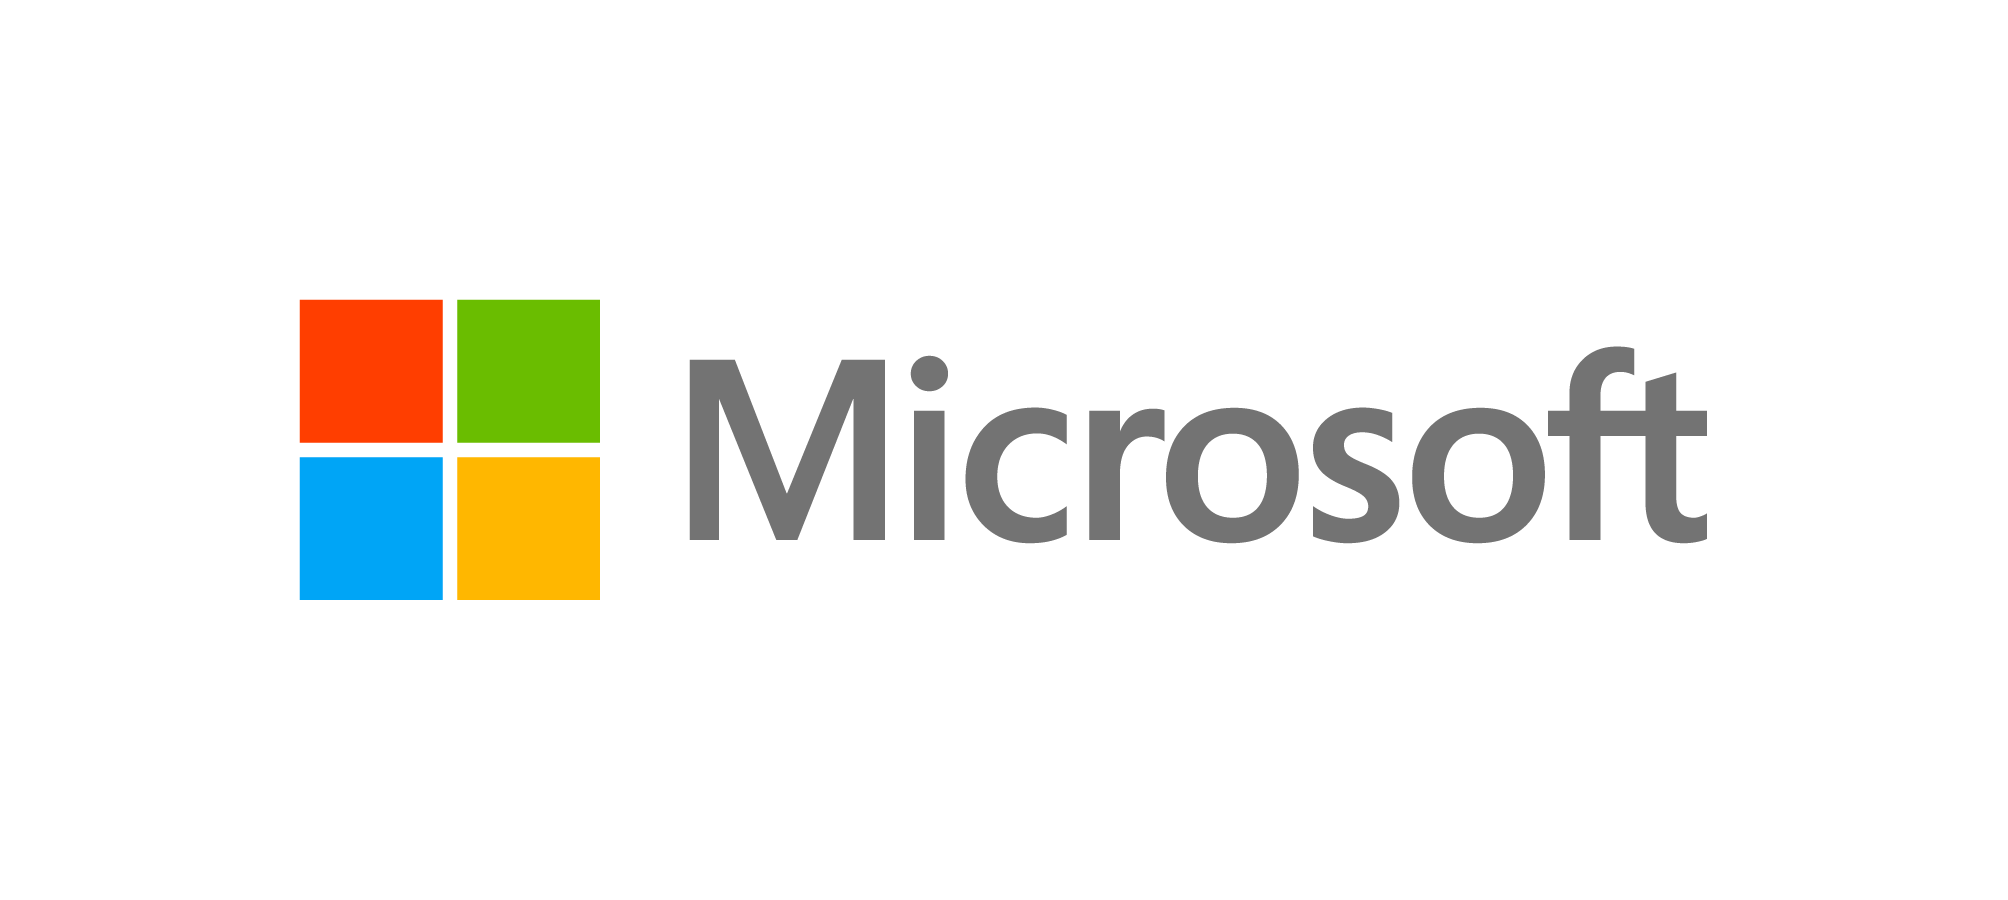 Featured image of Microsoft